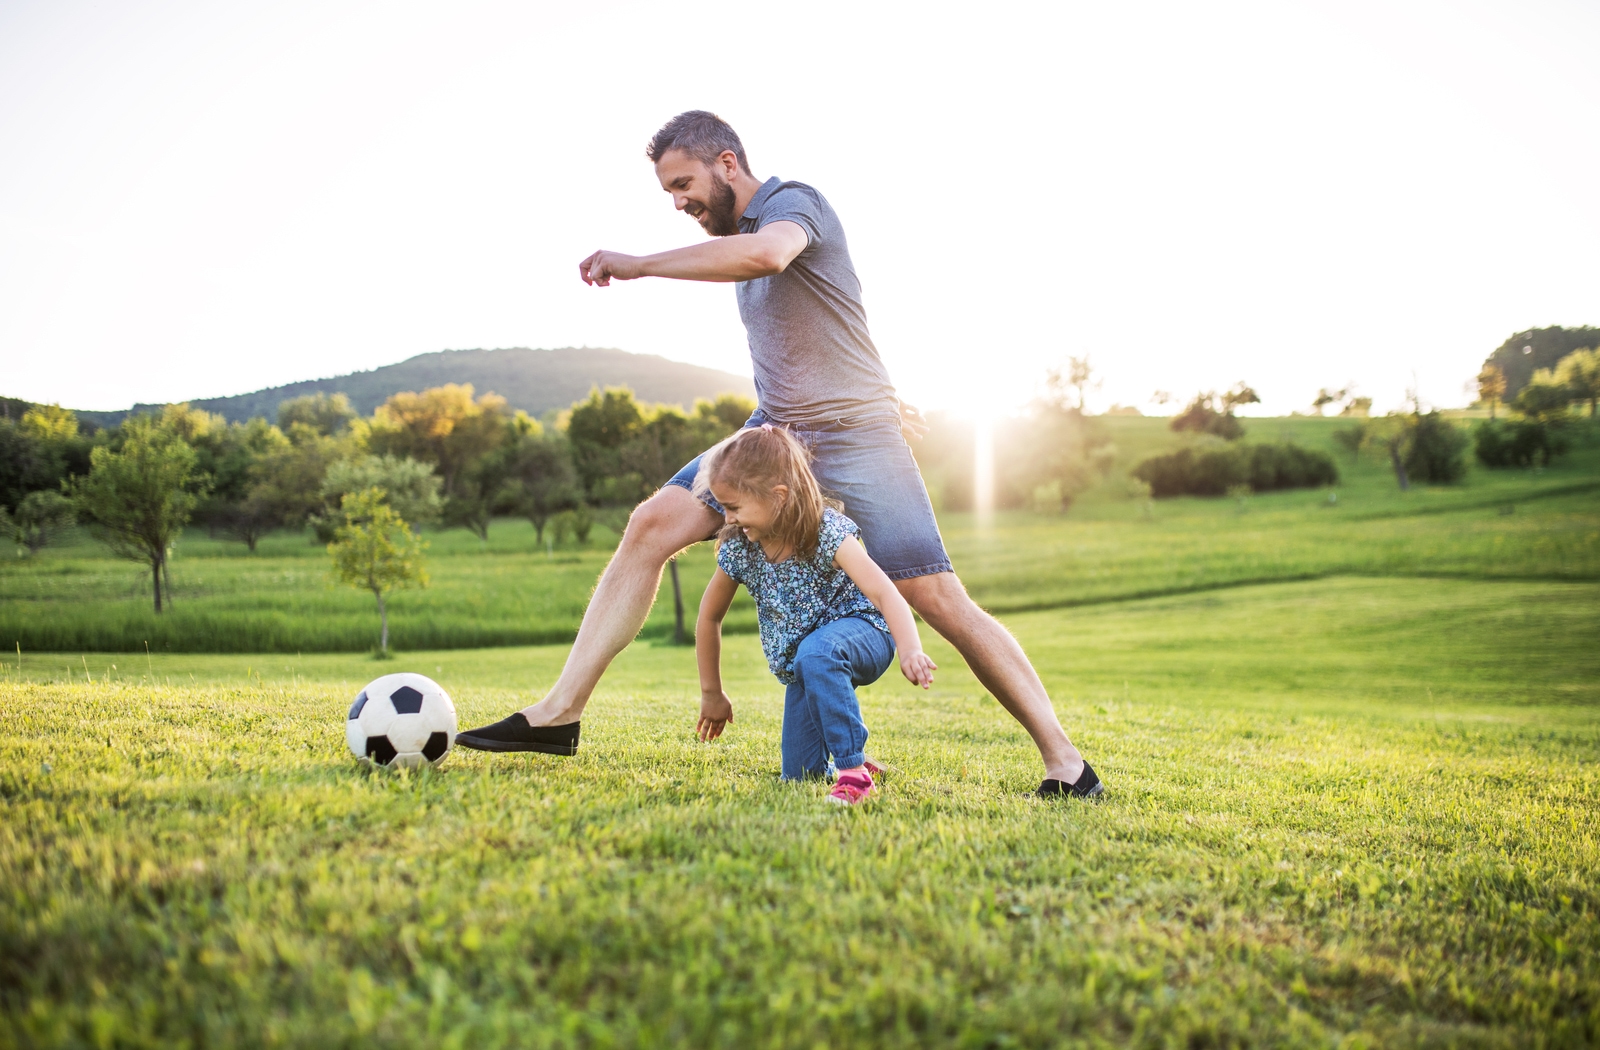 A dad and his young daughter play with a soccer ball in a green field with trees behind them.